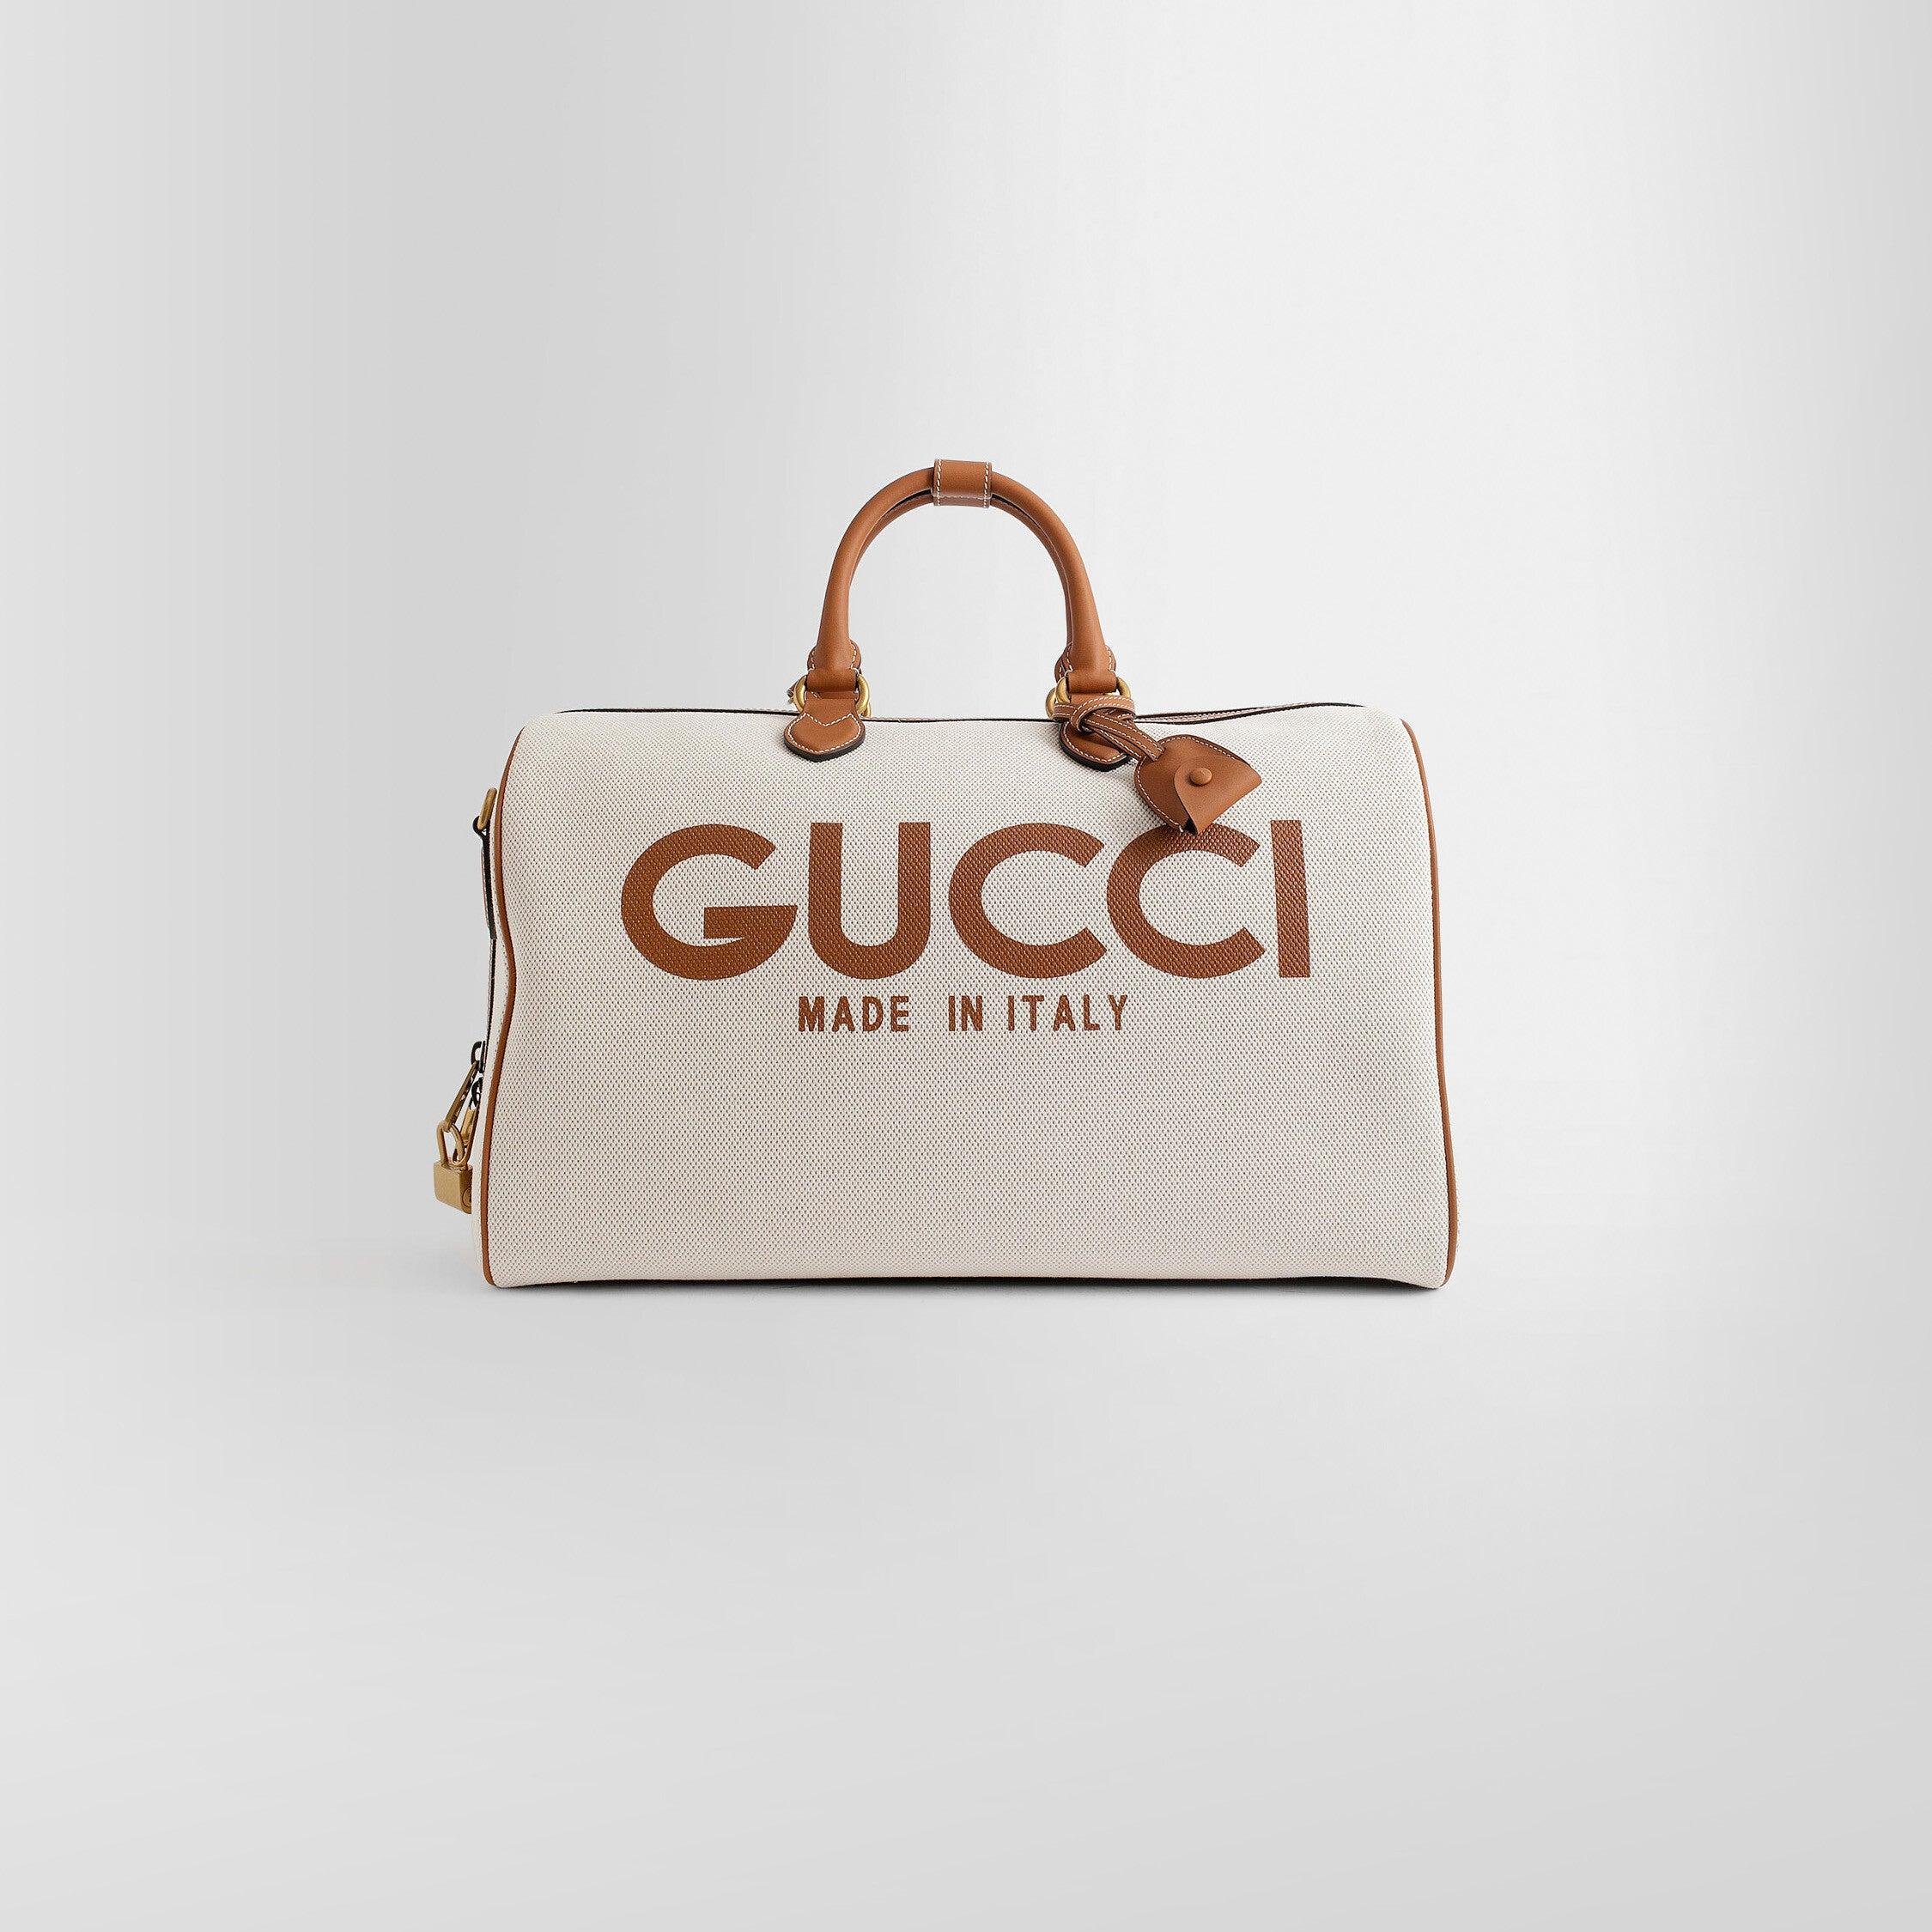 GUCCI UNISEX BEIGE TRAVEL BAGS by GUCCI